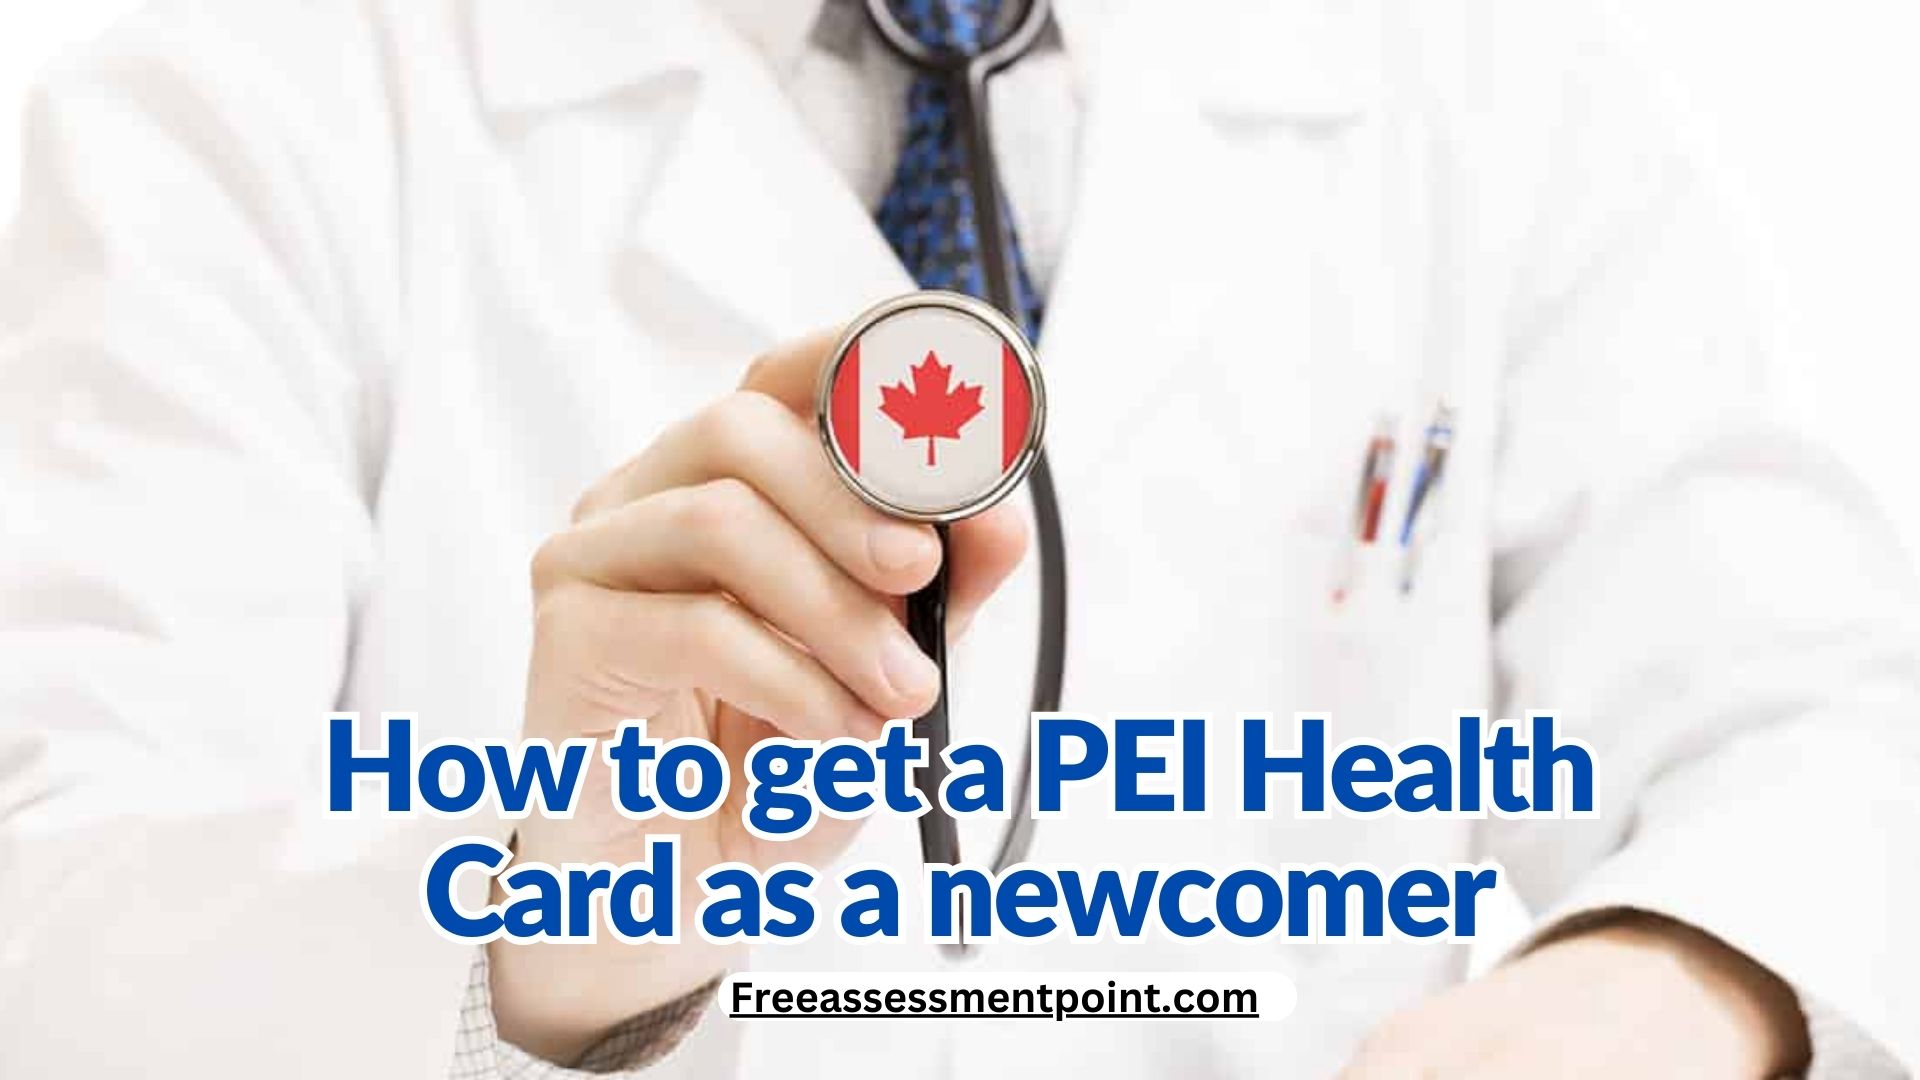 How to get a PEI Health Card as a newcomer